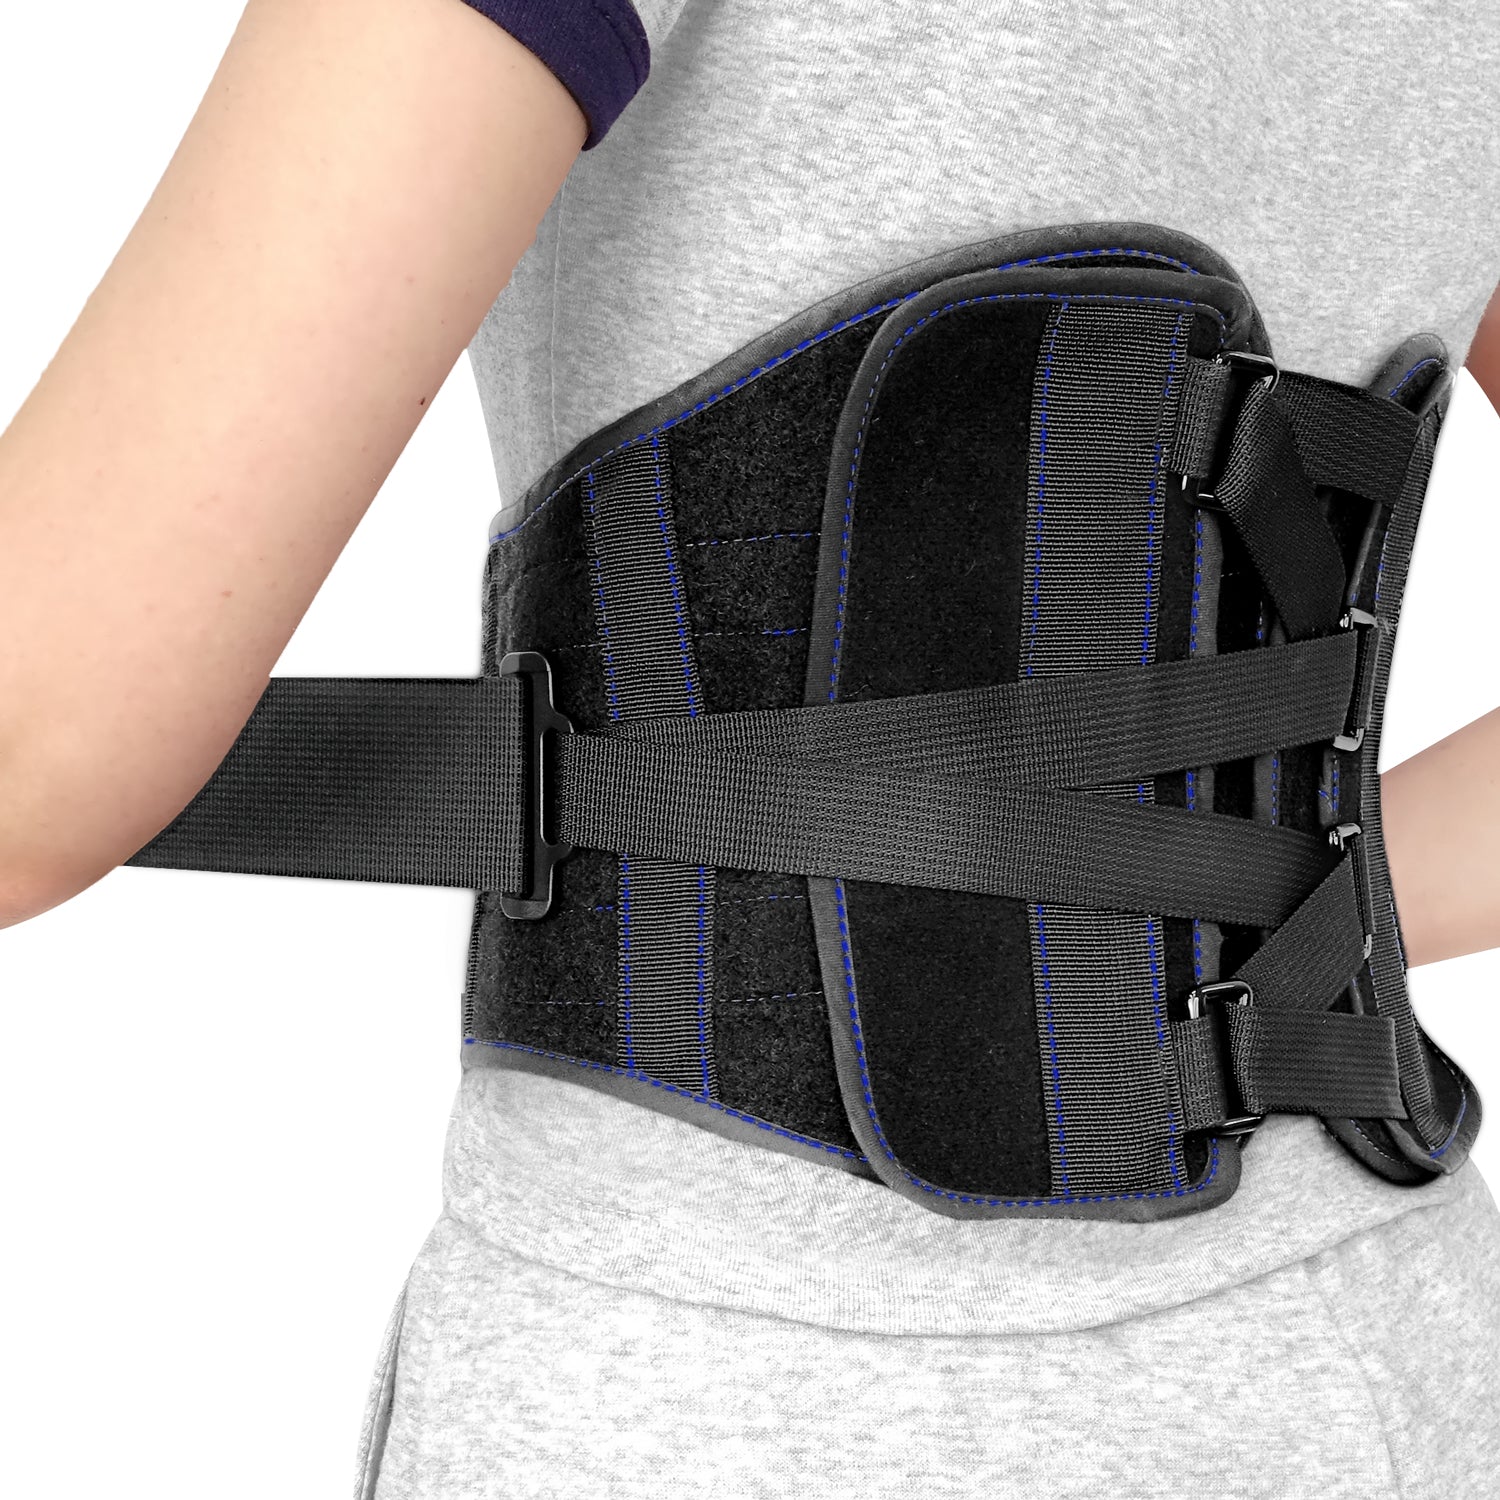 What is the difference between the lumber support belt and posture